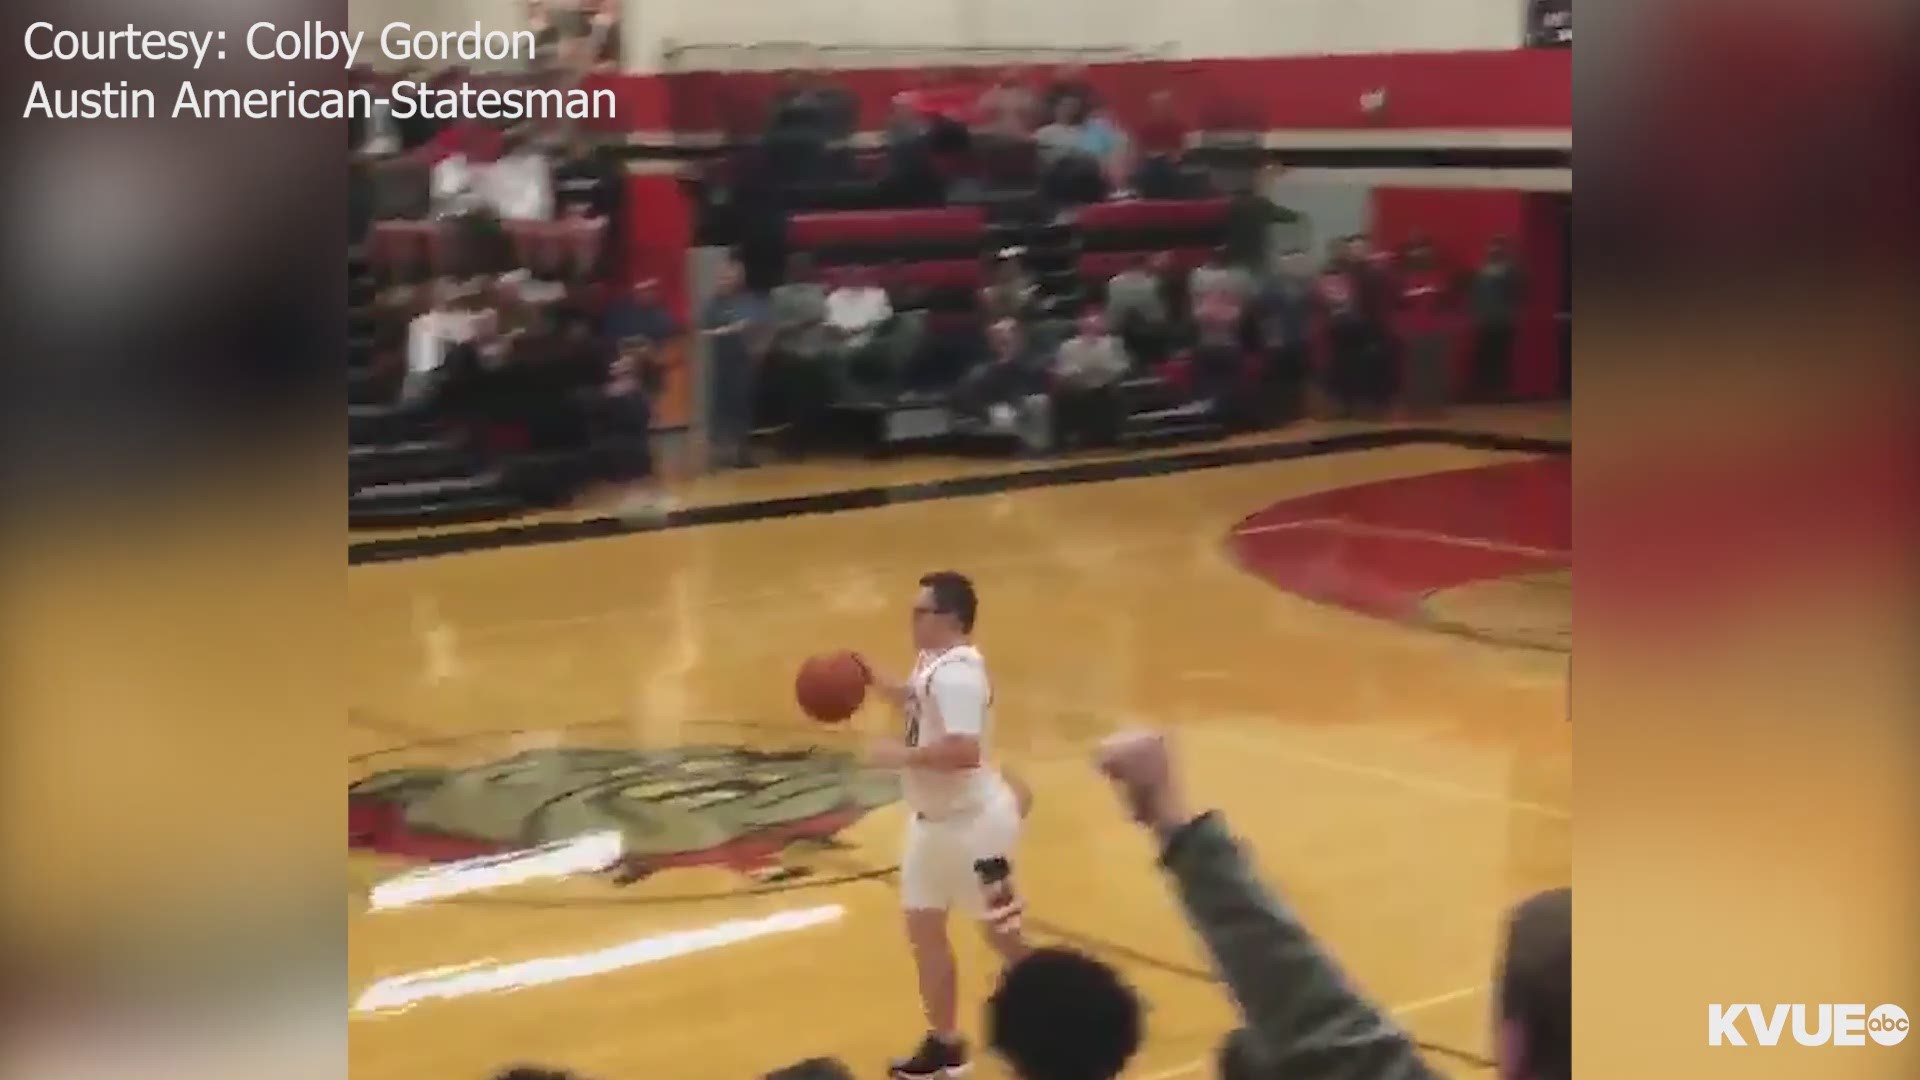 Shea O'Reilly, a Bowie High School senior with Down syndrome, hit a three-point pointer on Senior Night, drawing an eruption from the crowd.